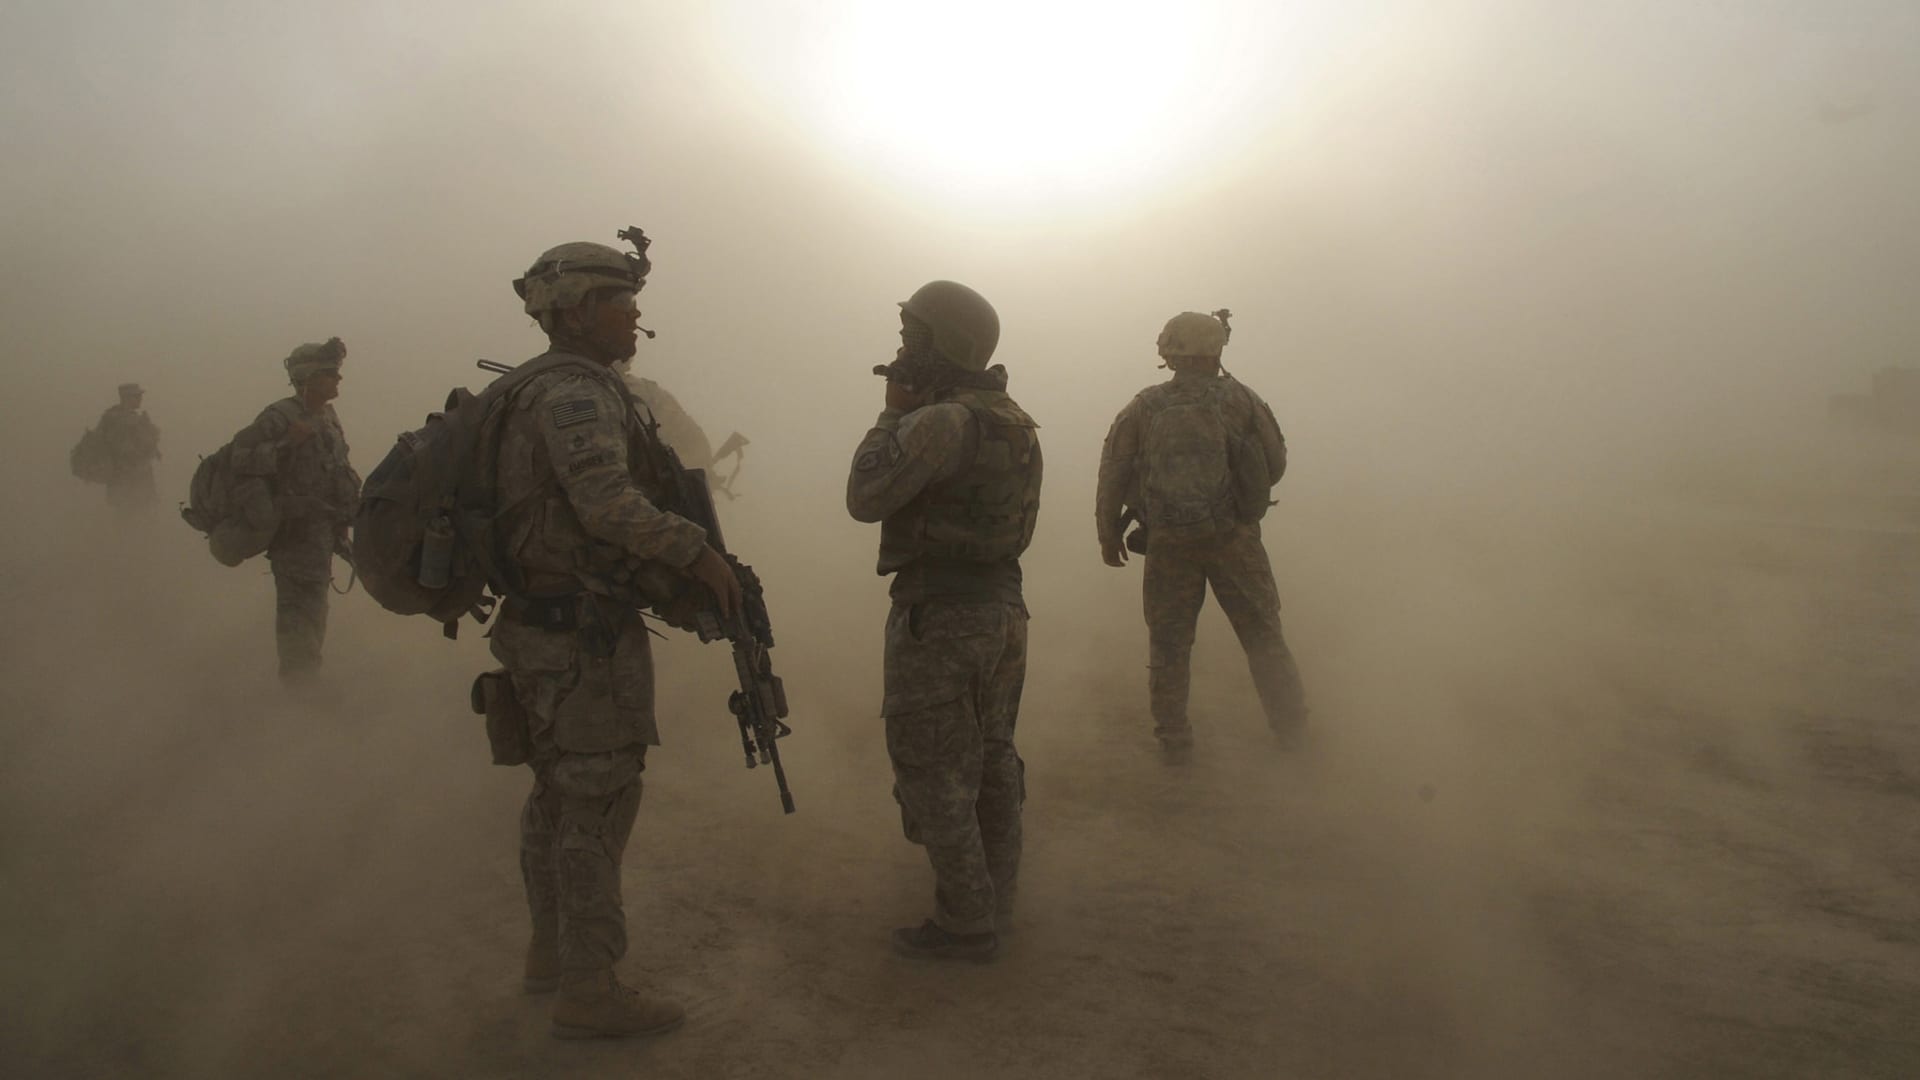 1st Battalion, 501st Infantry Regiment, 4th Brigade Combat Team, 25th Infantry Division, watch as CH-47 Chinook helicopters circle above during a dust storm at Forward Operating Base Kushamond, Afghanistan, July 17, during preparation for an air assault mission.